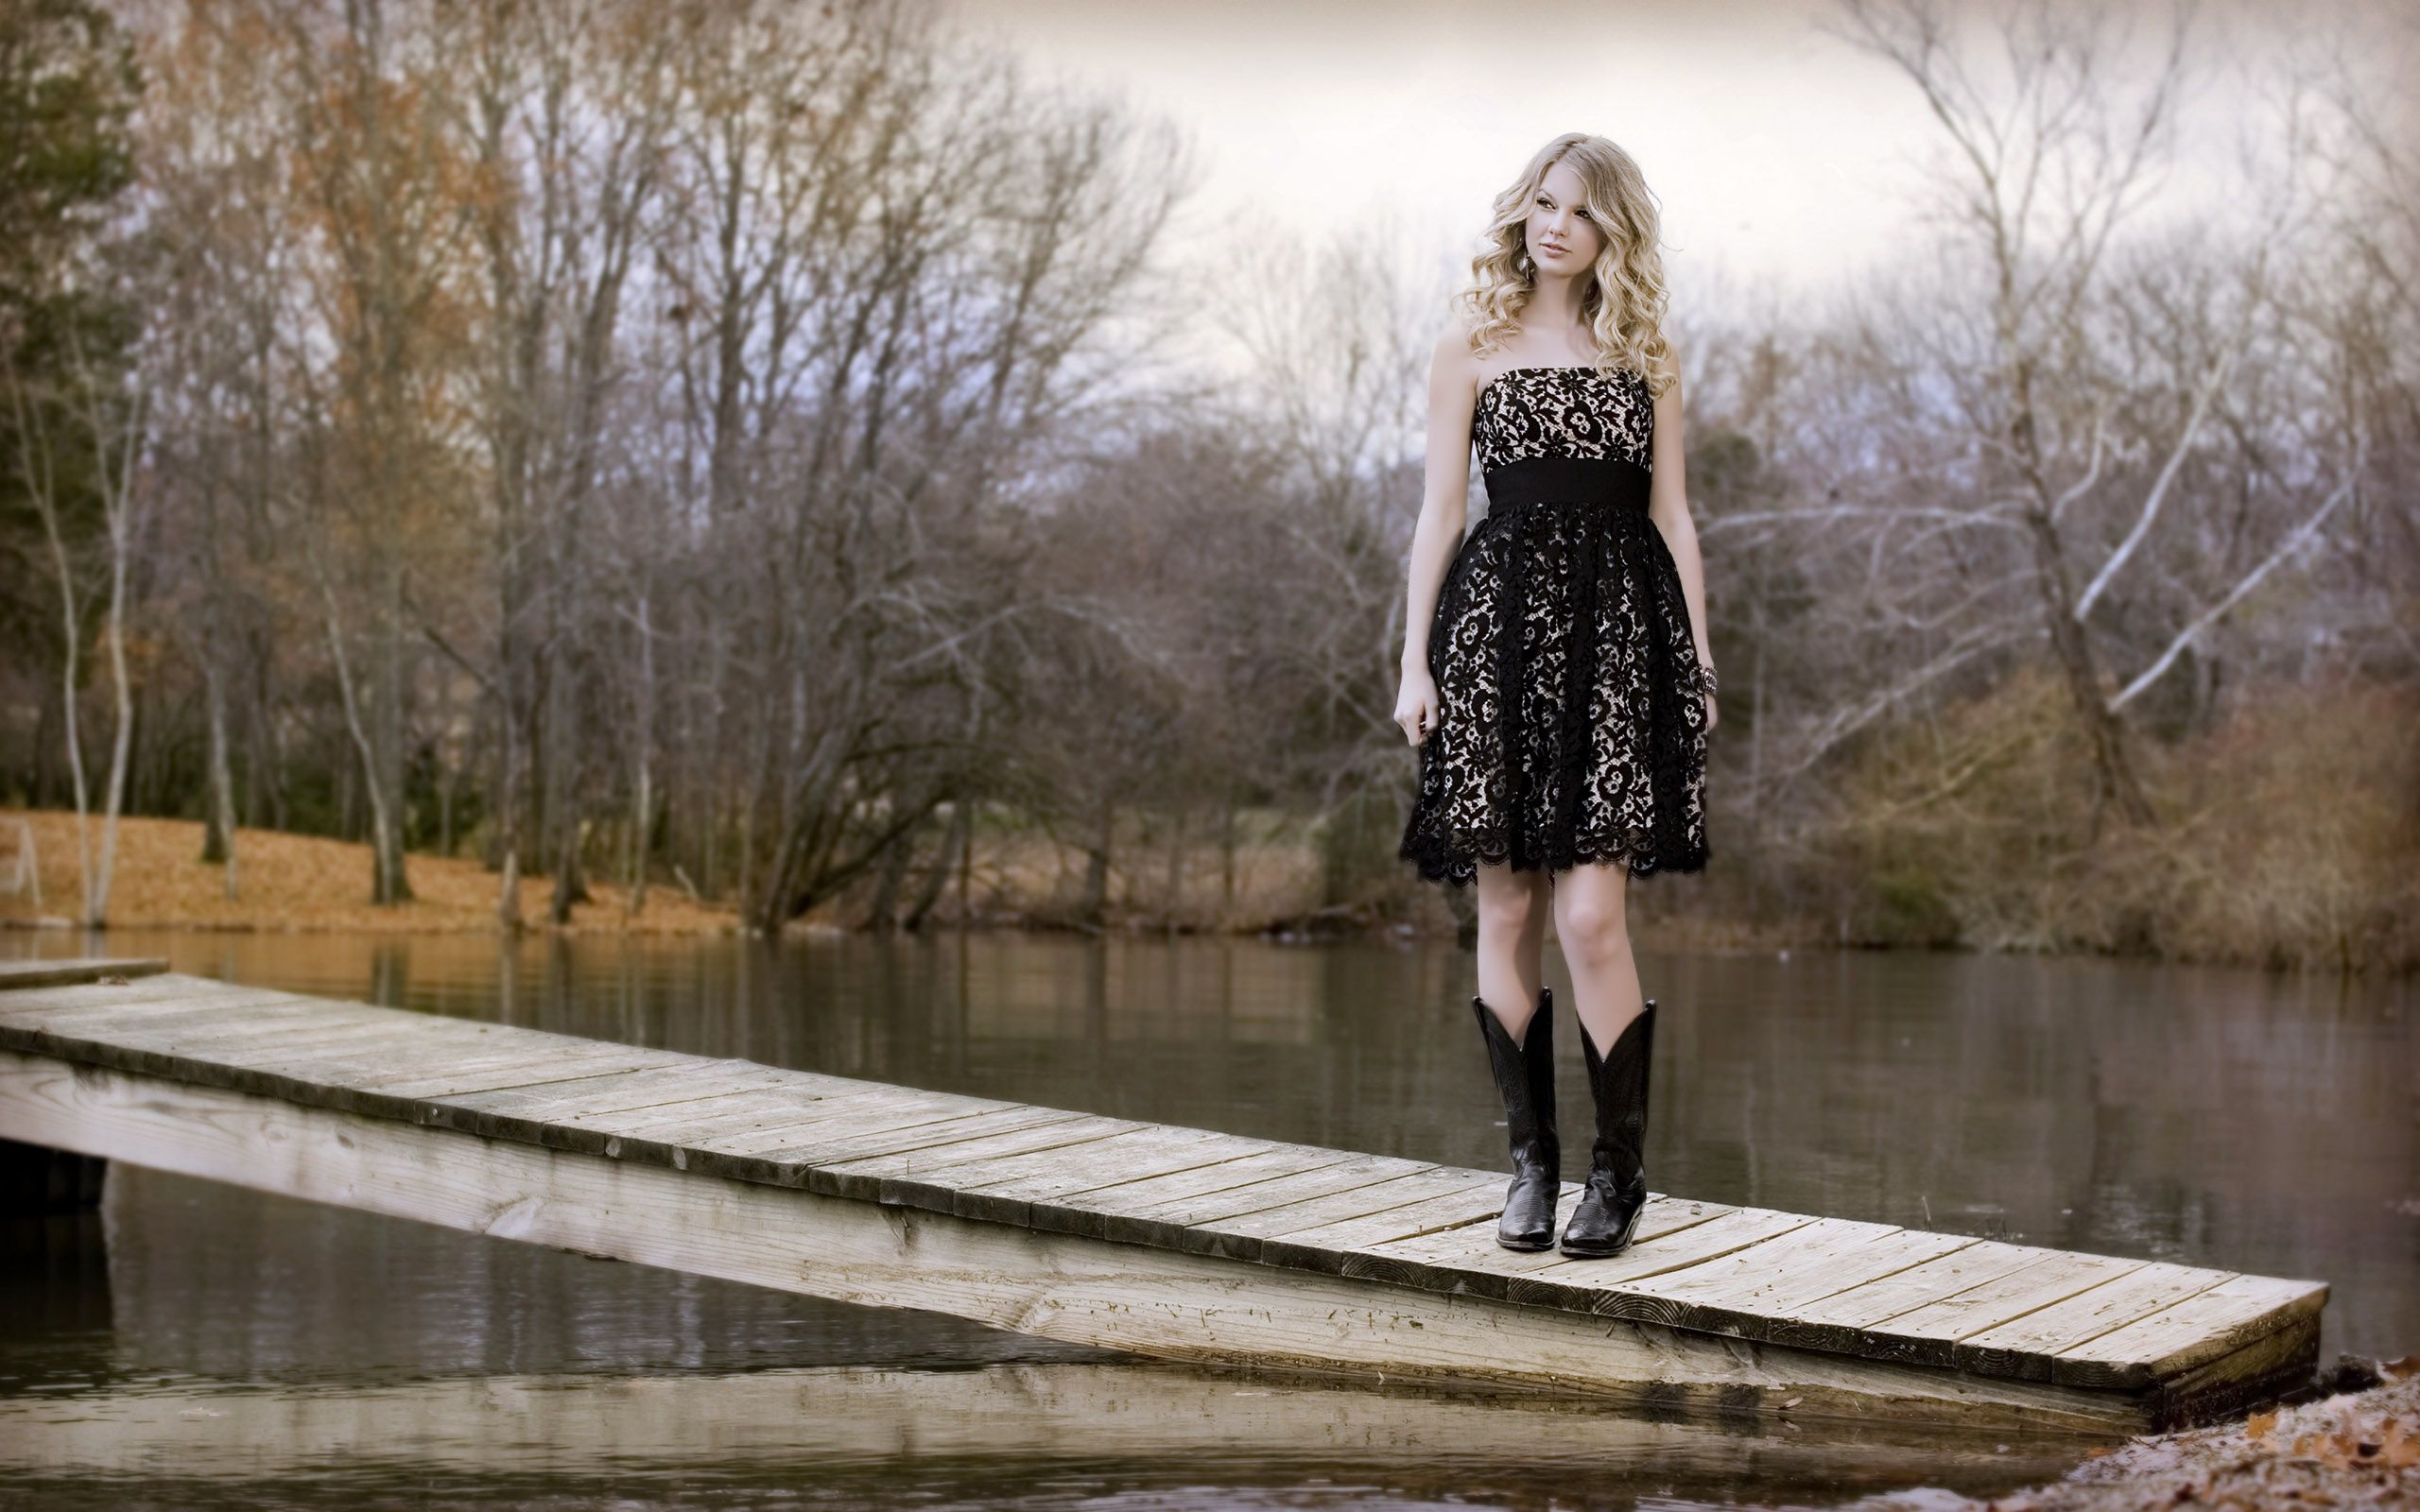 A woman in a black dress and cowboy boots stands on a dock. - Taylor Swift